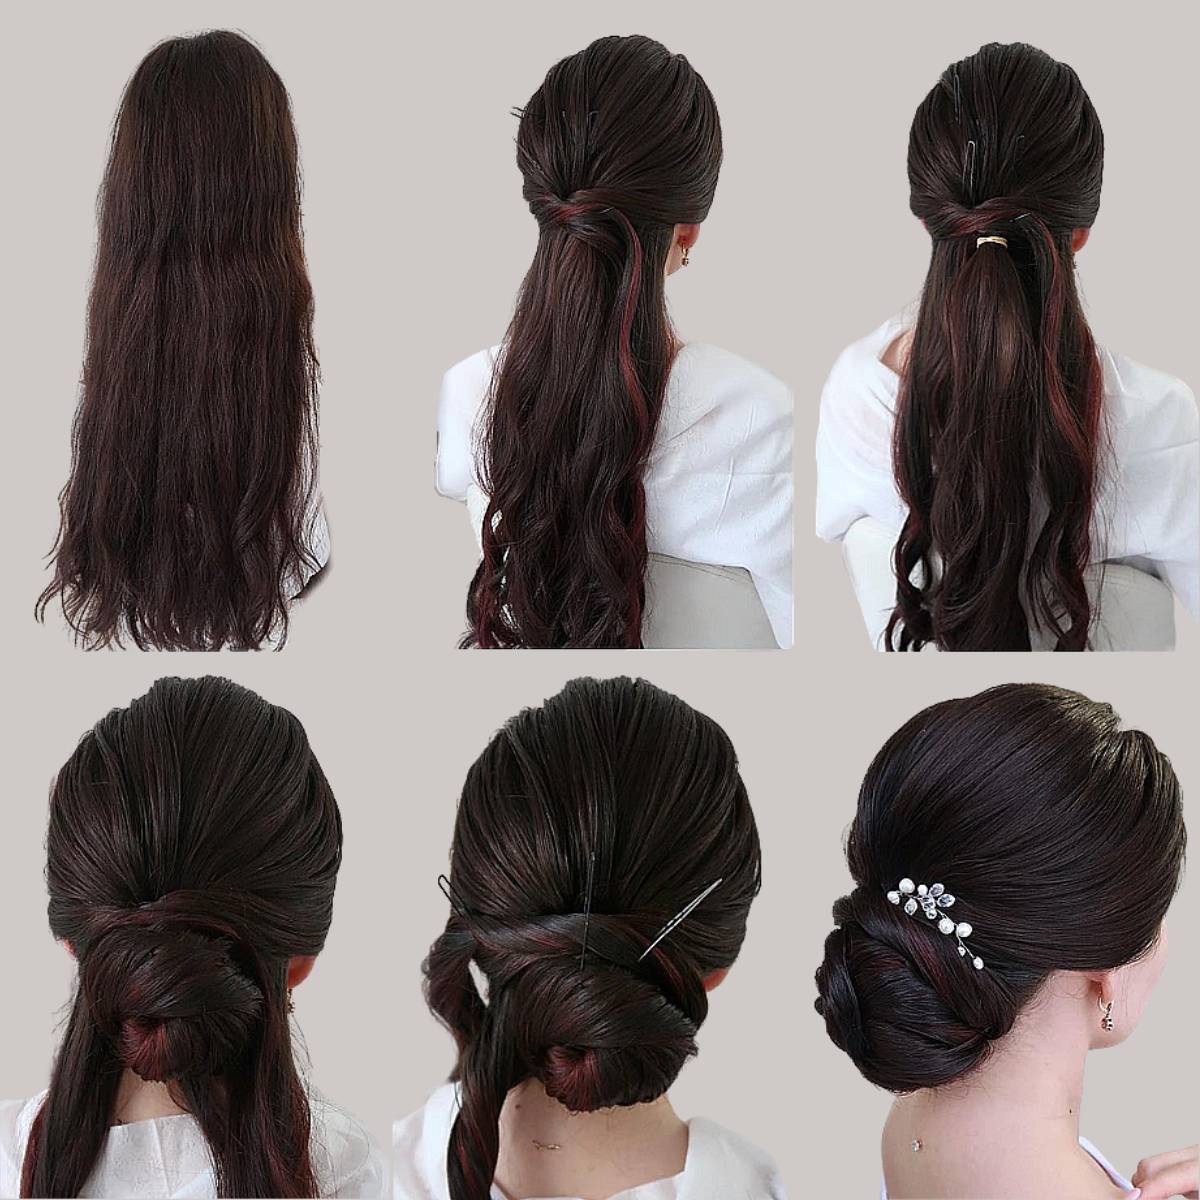 28 Easy Hairstyles for Long Hair  Make New Look